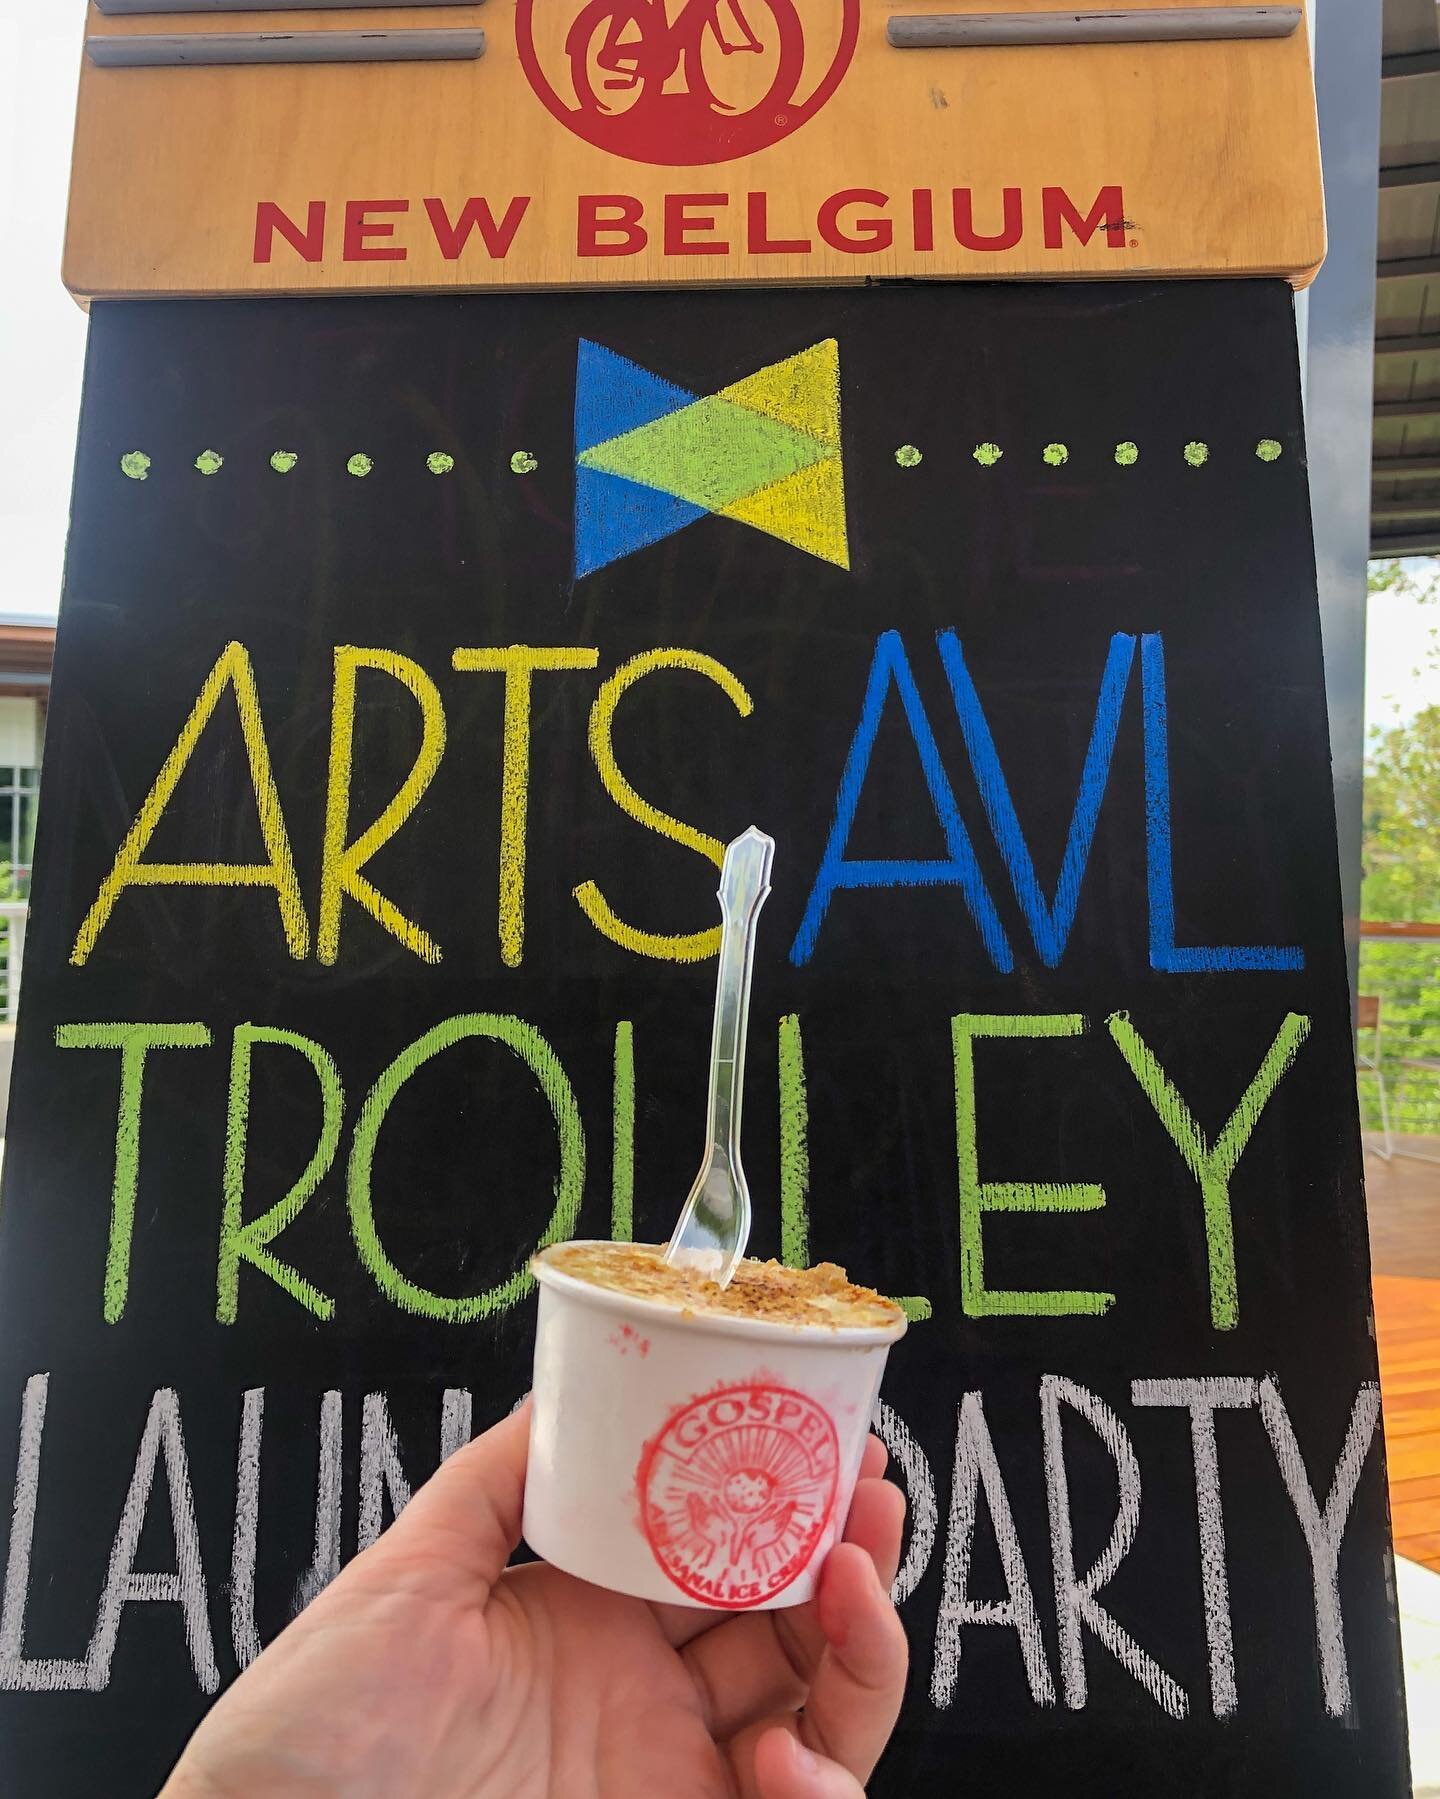 A Saturday spent celebrating the launch of the @artsasheville free Connect Trolley. We ate creme brulee @gospel.avl ice cream, sipped delightful @newbelgium_avl brews, and saw old friends like @clareluvy, @curvetheory, @curly35846, and of course my b